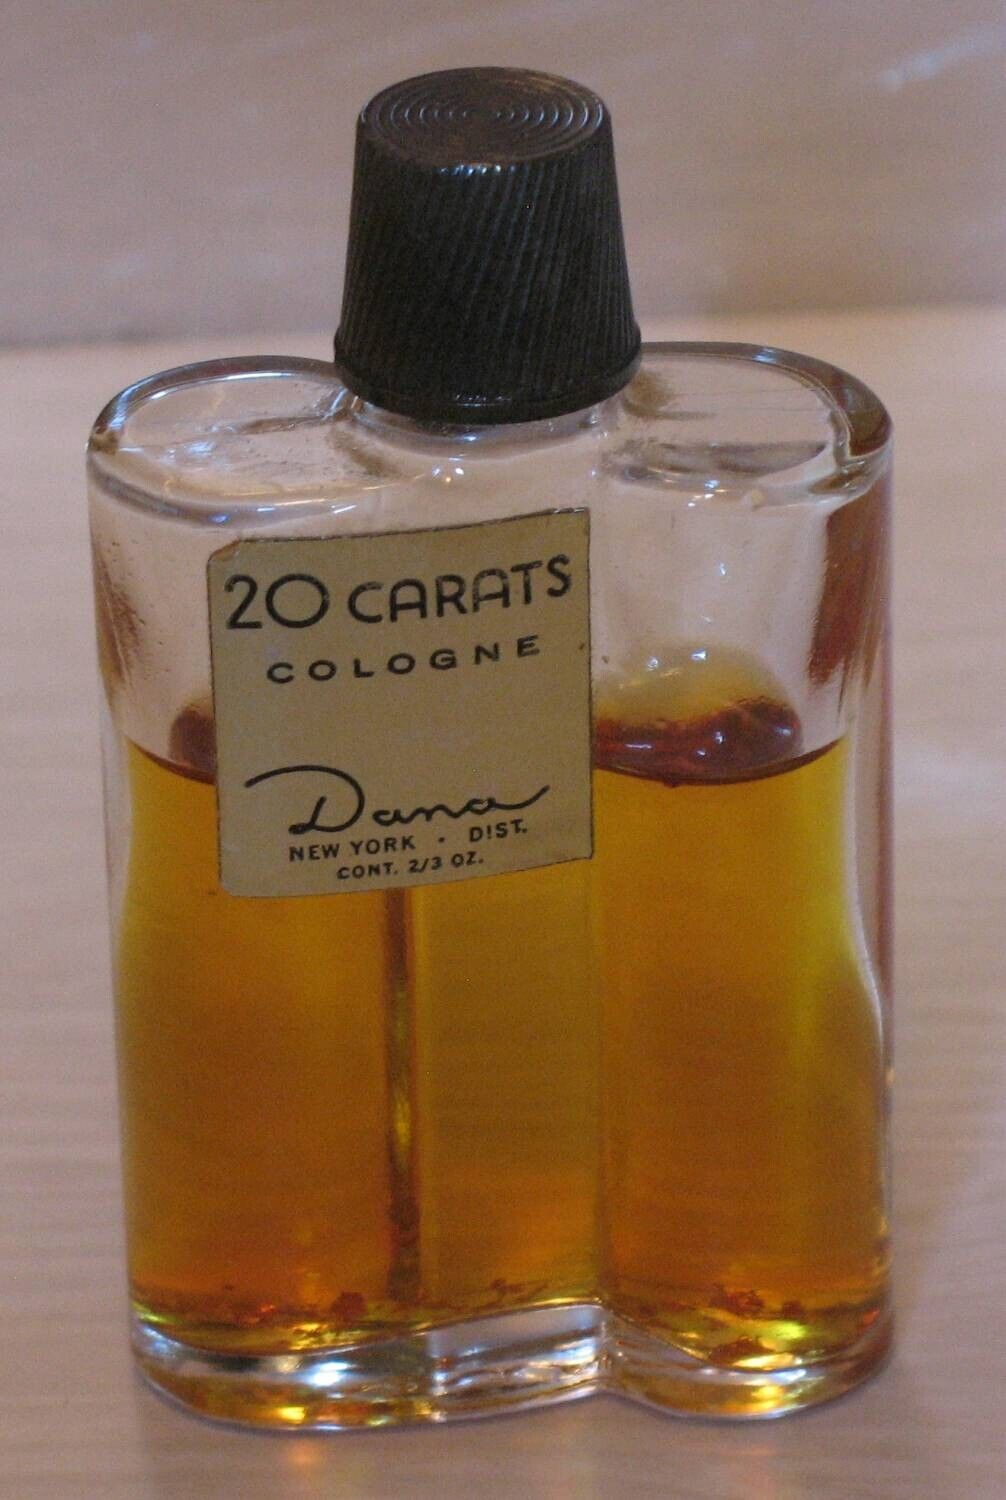 Vintage 20 CARATS Cologne  By Dana   2/3 Oz.  - 75% Full   w/ Gold Flakes